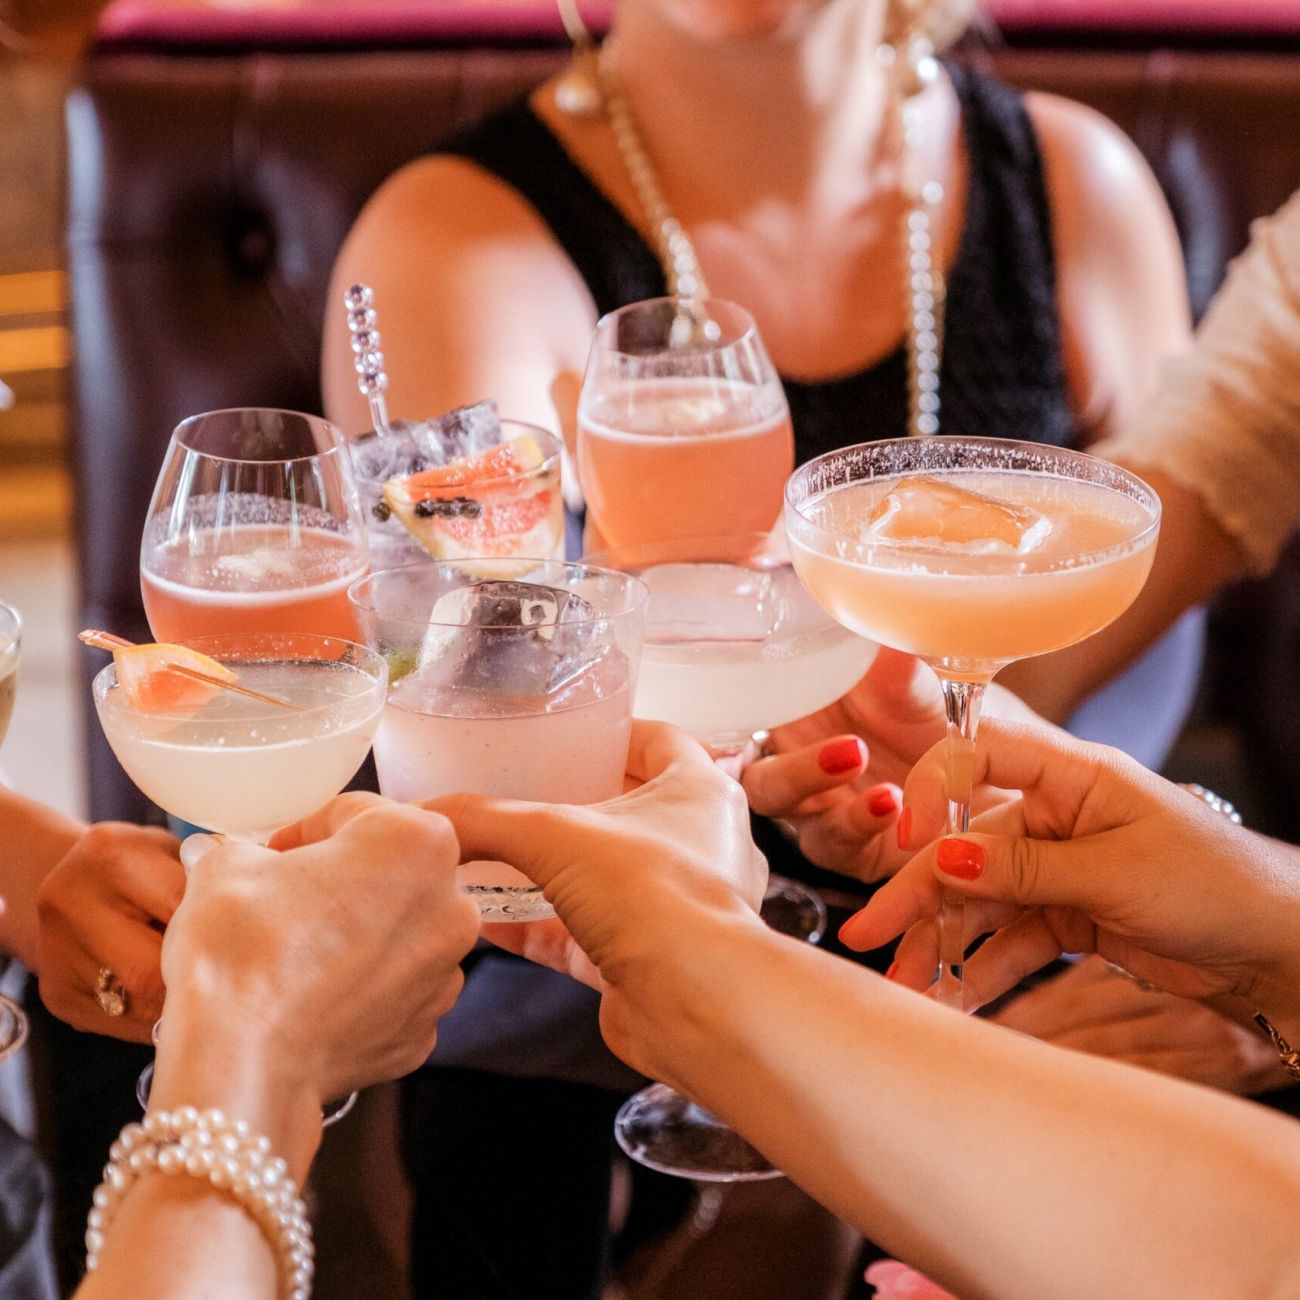 Close up of women's hands holding pink and clear cocktails during a toast.